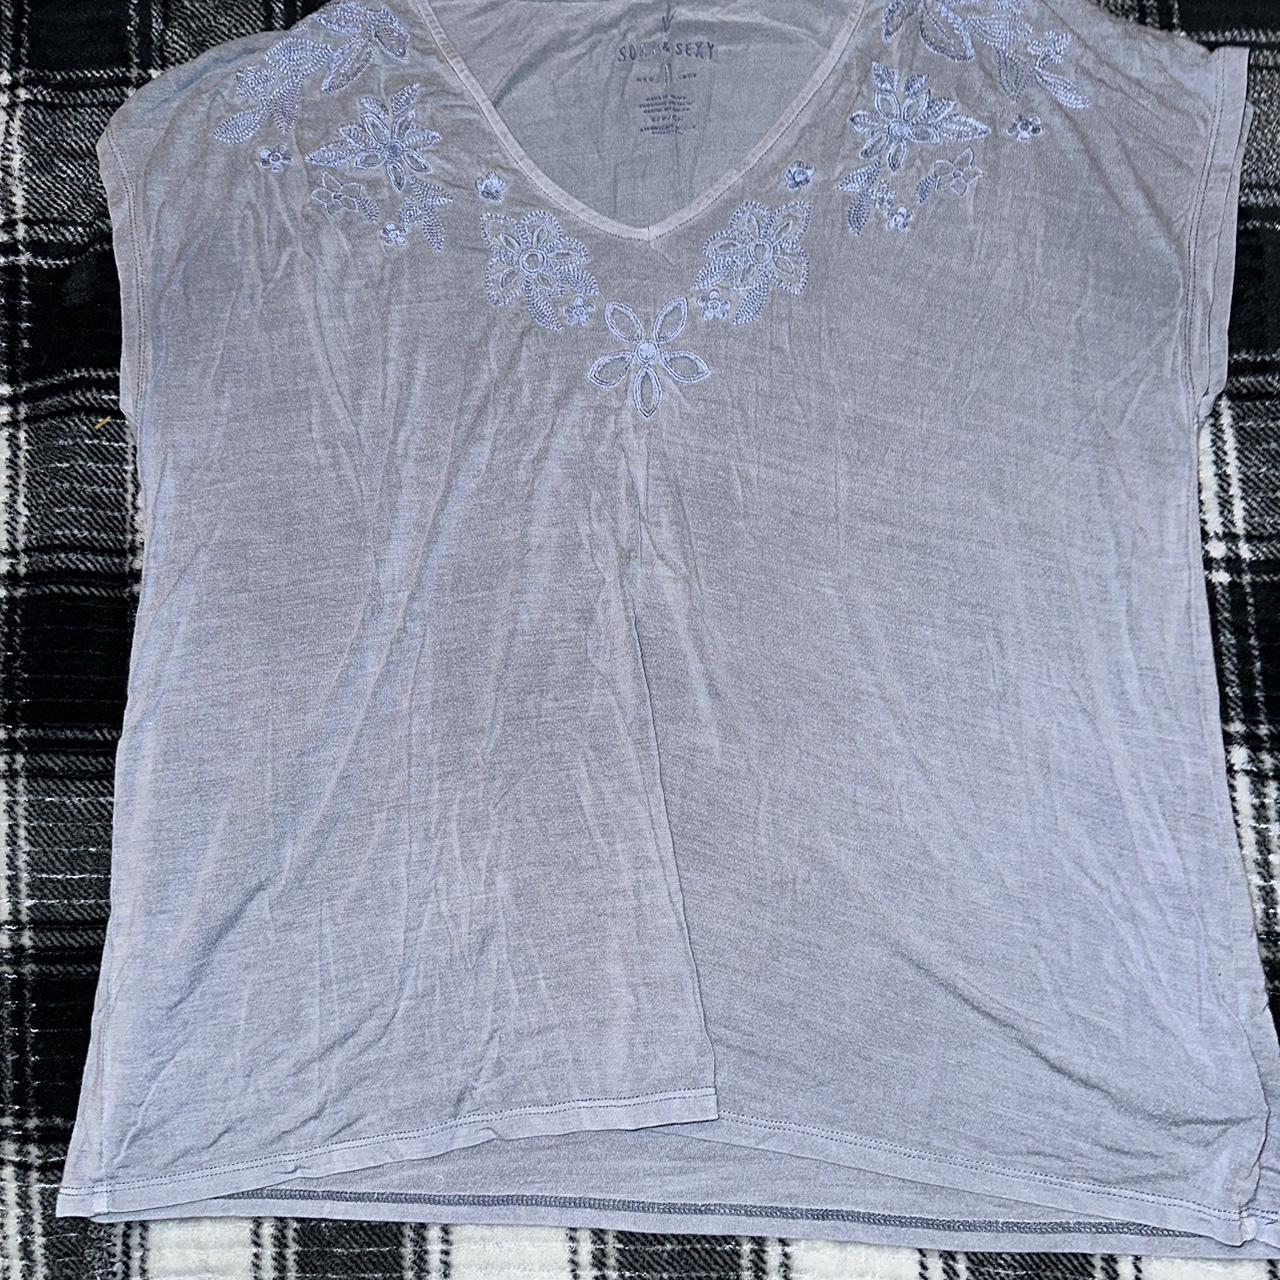 American Eagle Outfitters Women's Blue and Grey T-shirt